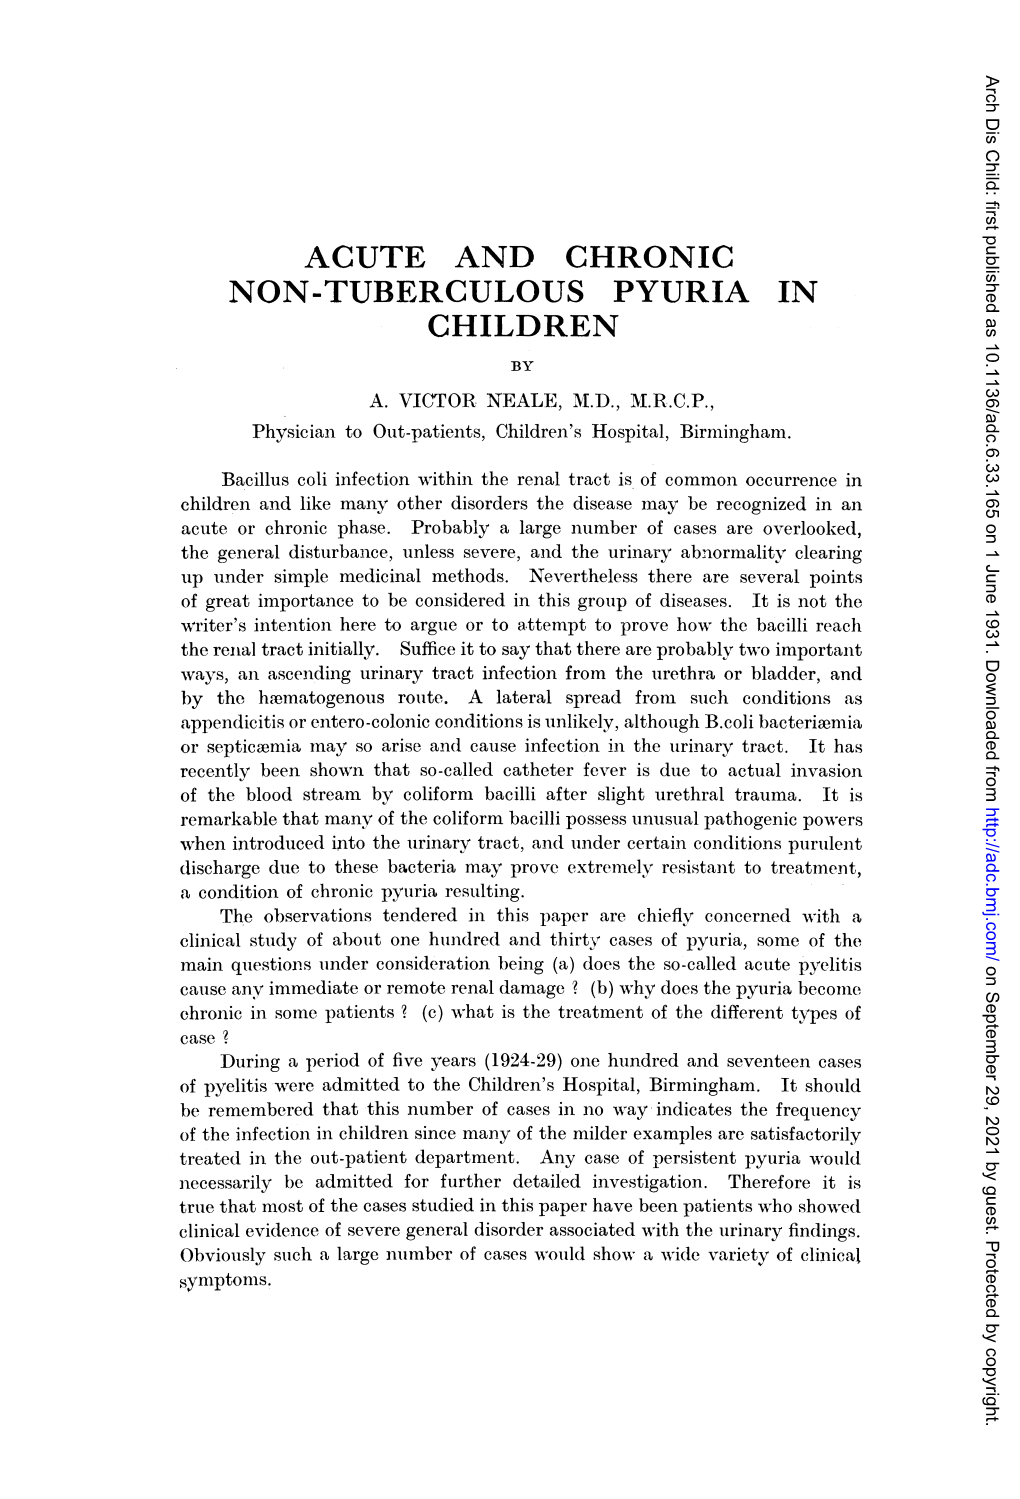 Acute and Chronic Non-Tuberculous Pyuria in Children by A